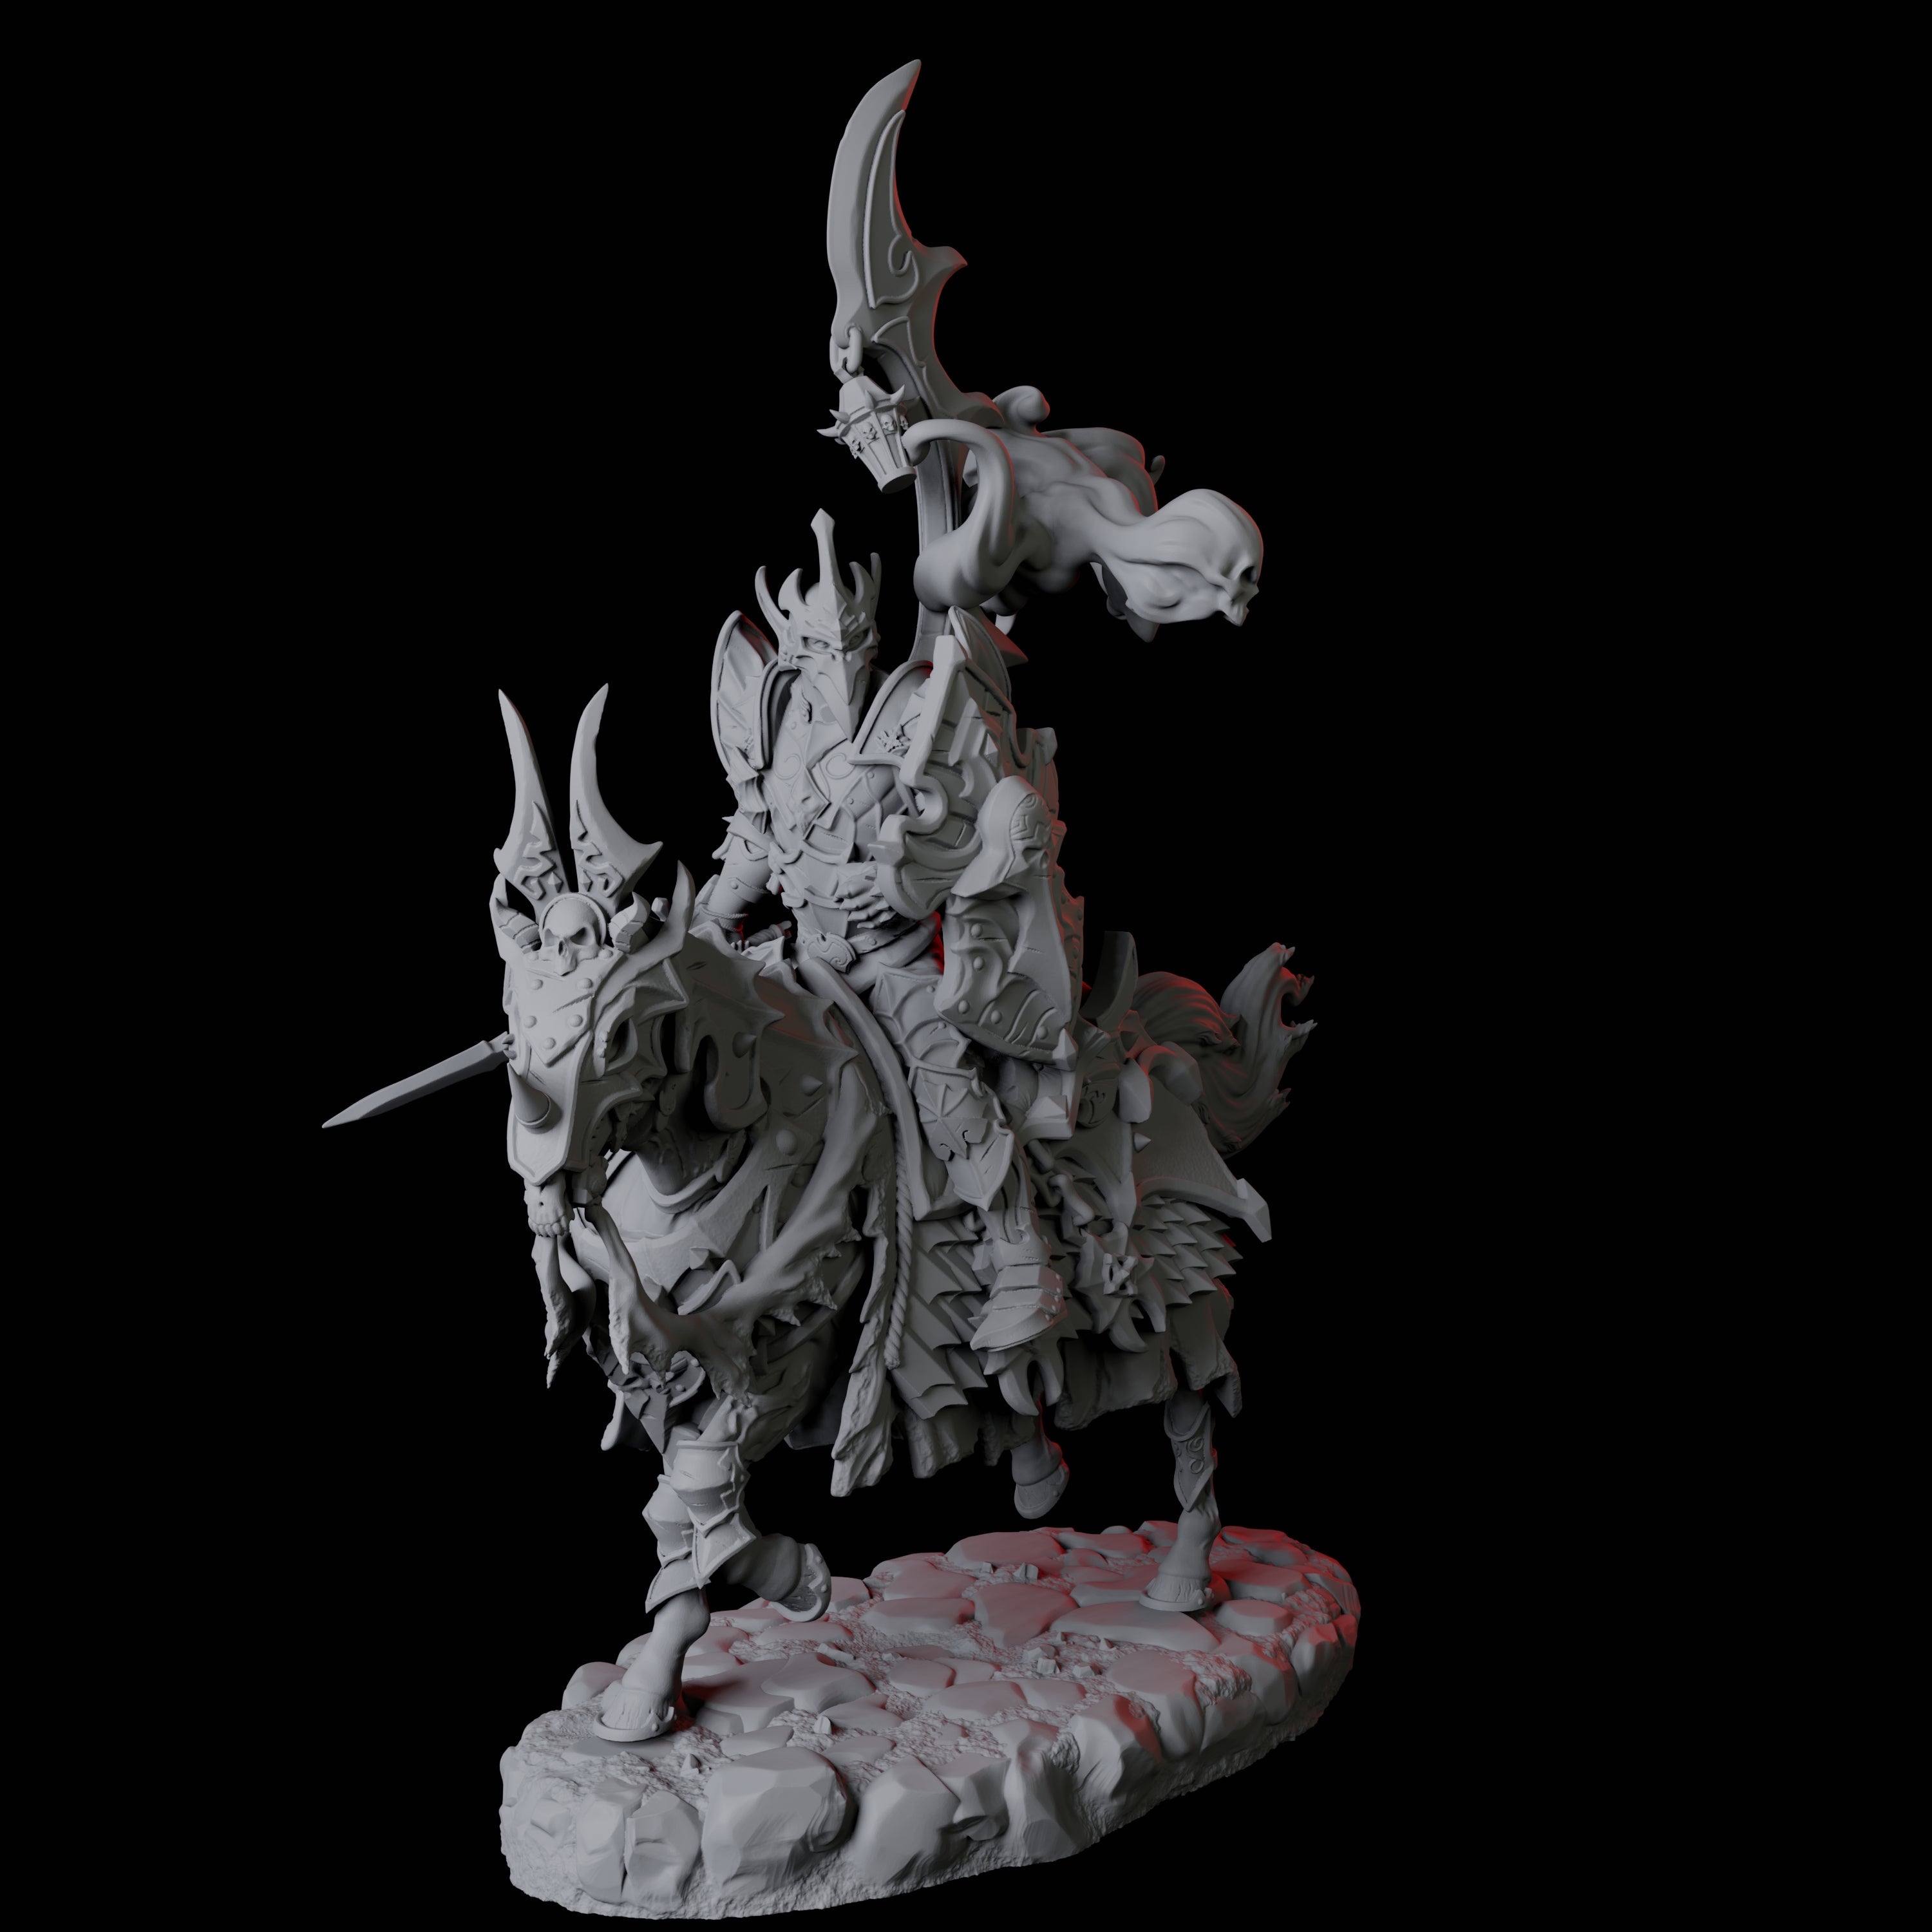 Four Stalking Mounted Revenants Miniature for Dungeons and Dragons, Pathfinder or other TTRPGs